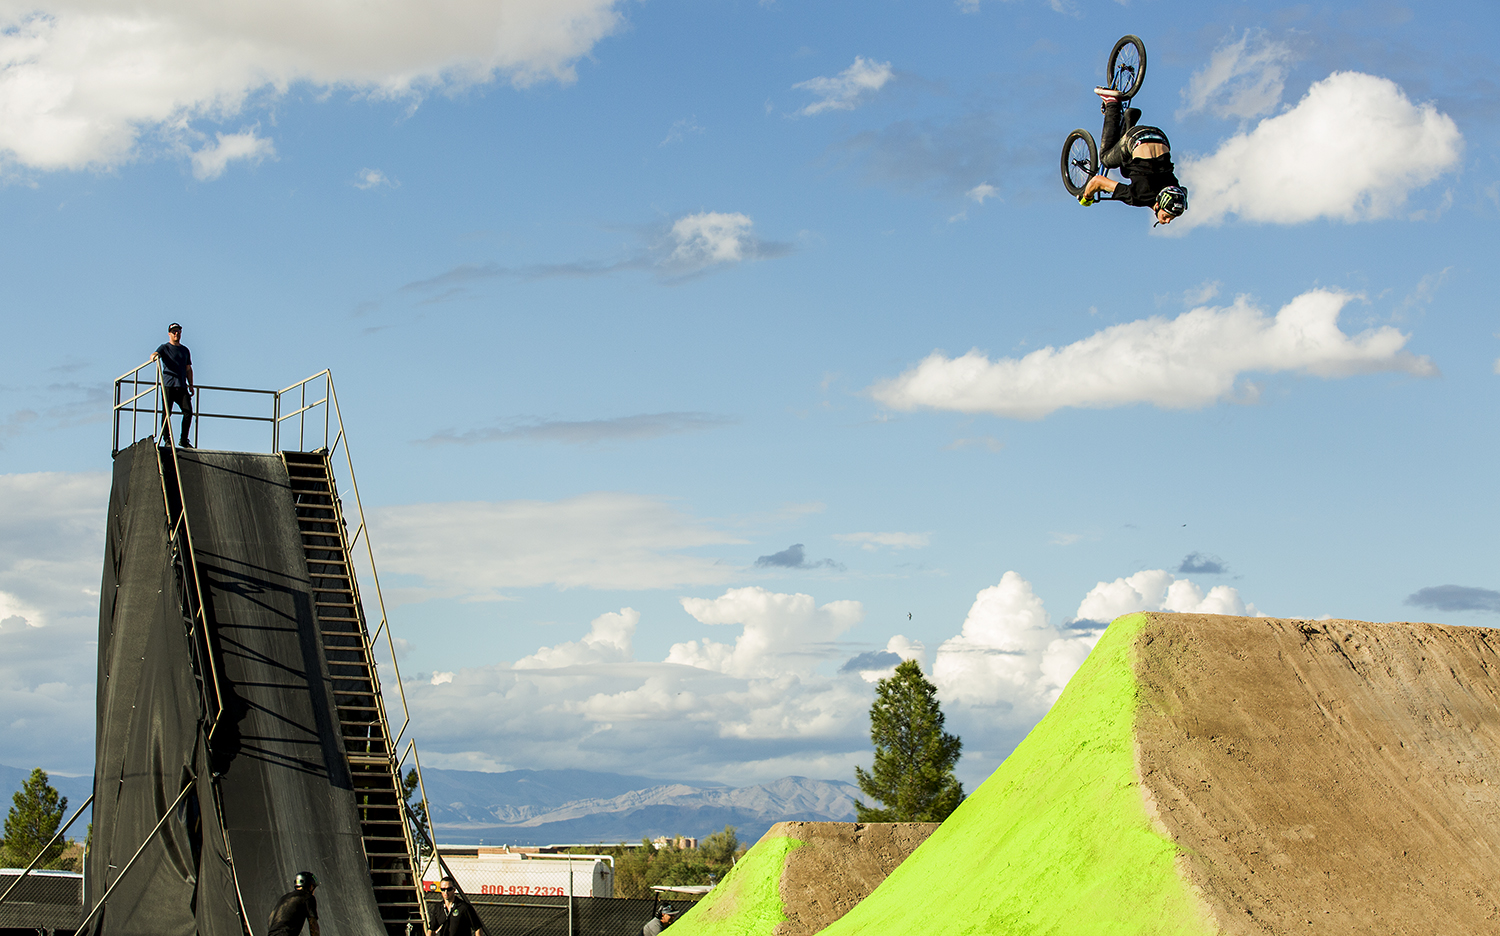 Monster Energy's Andy Buckworth at the Monster Cup BMX Dirt Jam in Vegas